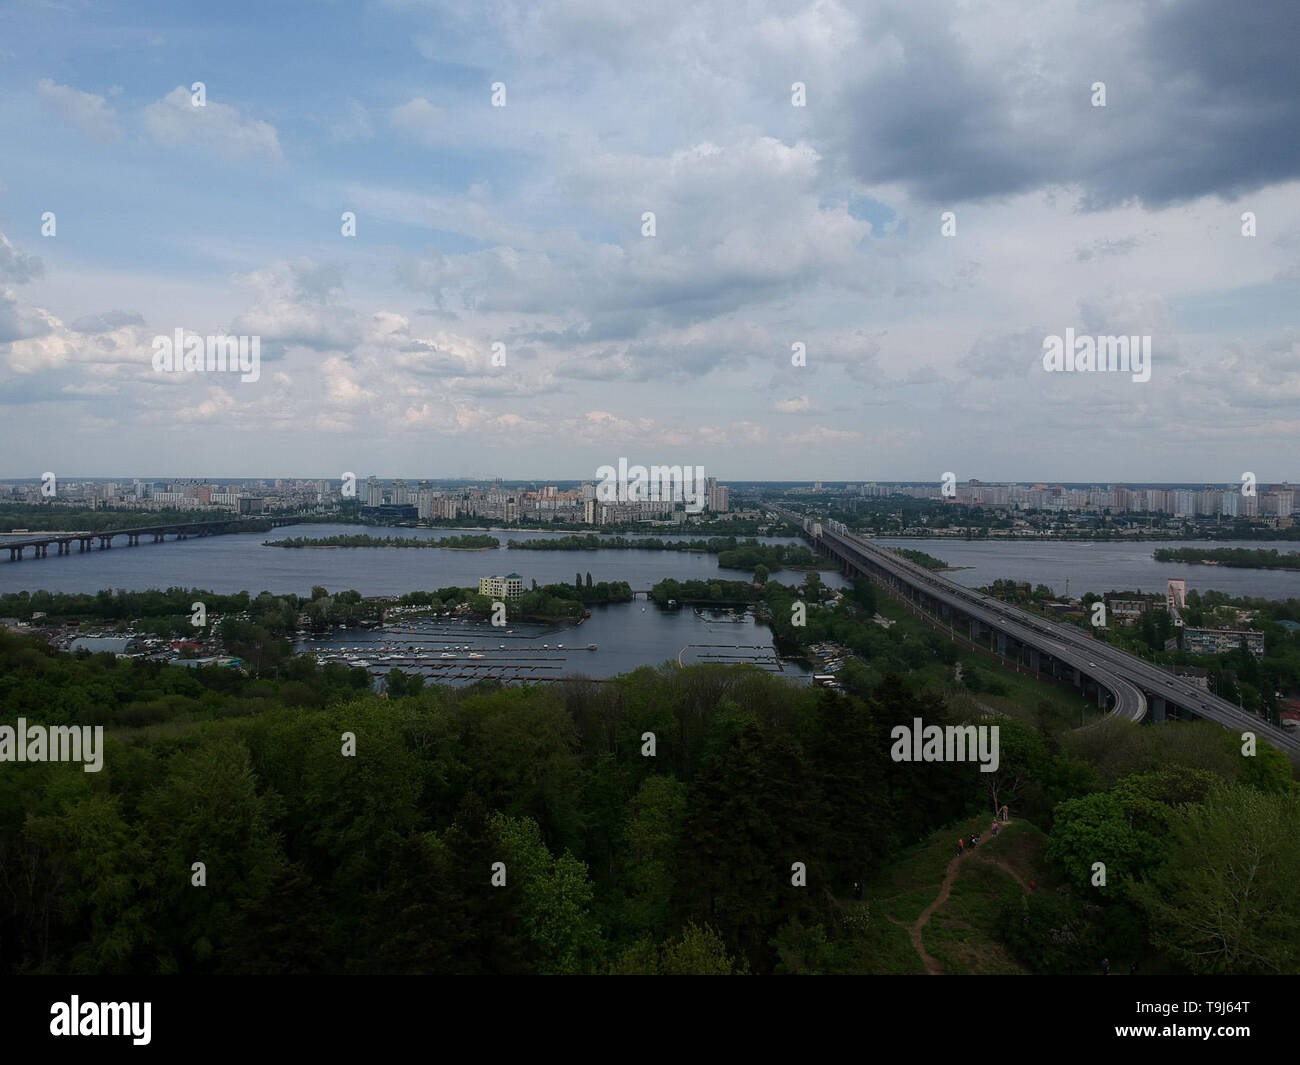 May 5, 2019 - Kiev, kiev, Ukraine - (EDITORâ€™S NOTE: Image taken with a drone).An aero view of the Hryshko National Botanical Garden..Hryshko National Botanical Garden is a botanical garden of the National Academy of Sciences of Ukraine. It contains 13,000 types of trees, shrubs, flowers and other plants from all over the world and The Botanical garden can impress with more than 350 species of orchids. (Credit Image: © Mohammad Javad Abjoushak/SOPA Images via ZUMA Wire) Stock Photo